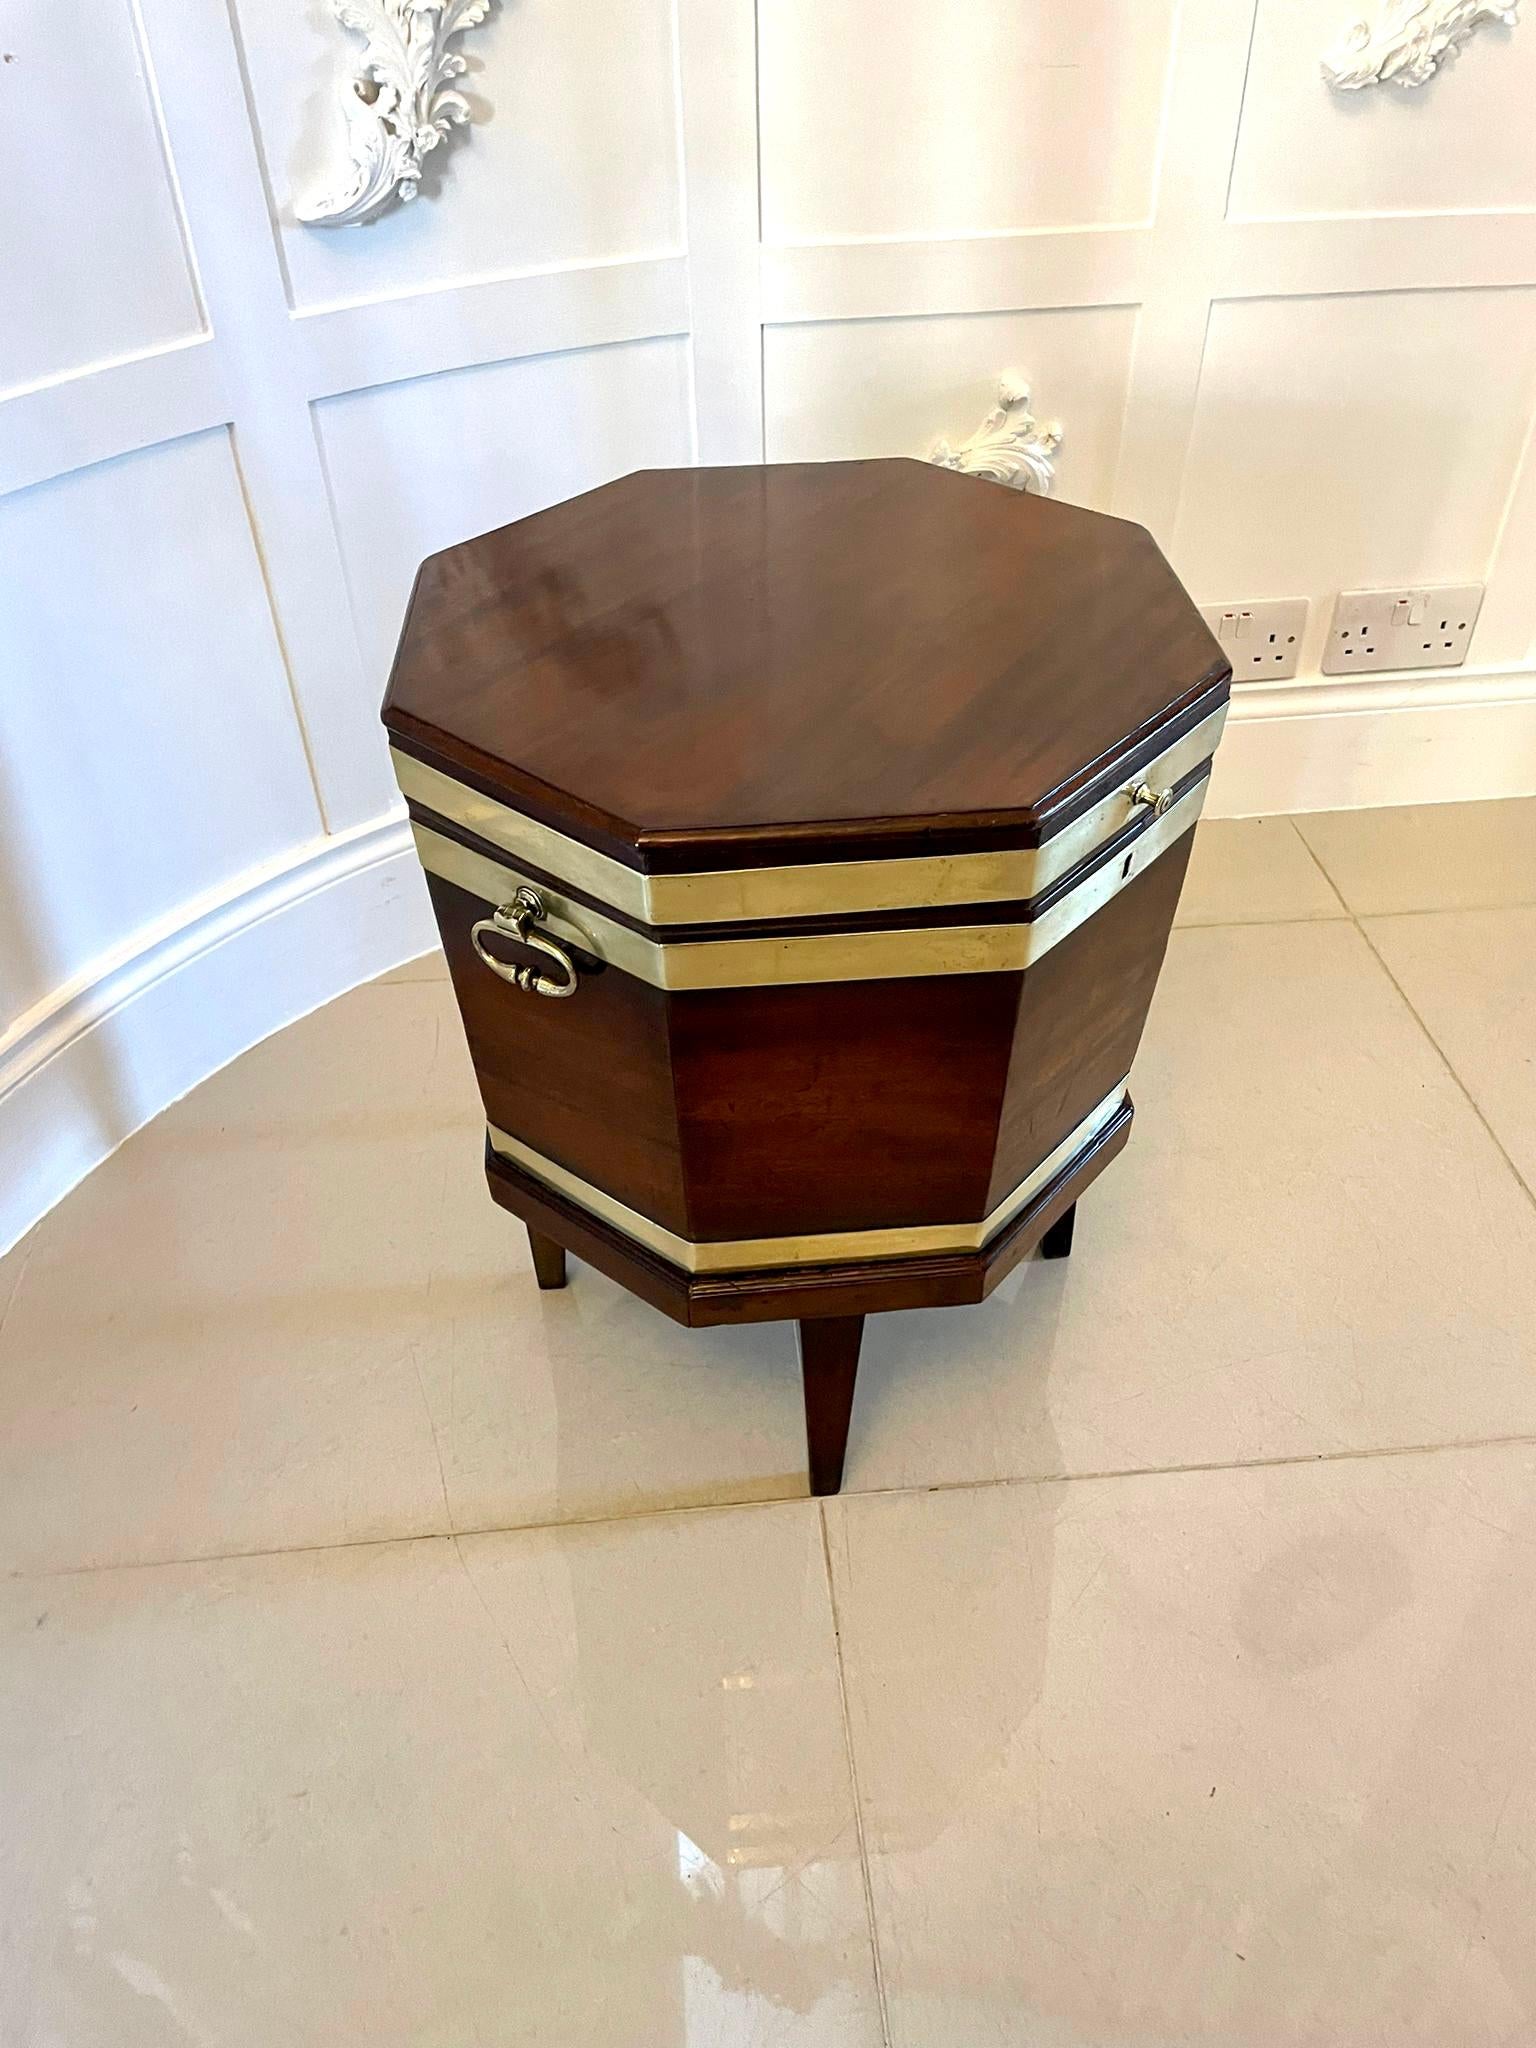 Fine 18th century antique George III quality mahogany brass bound wine cooler having a quality mahogany hexagonal shaped lift up top opening to reveal the original lead lined interior, 3 original brass bounds, 2 original carrying handles, original